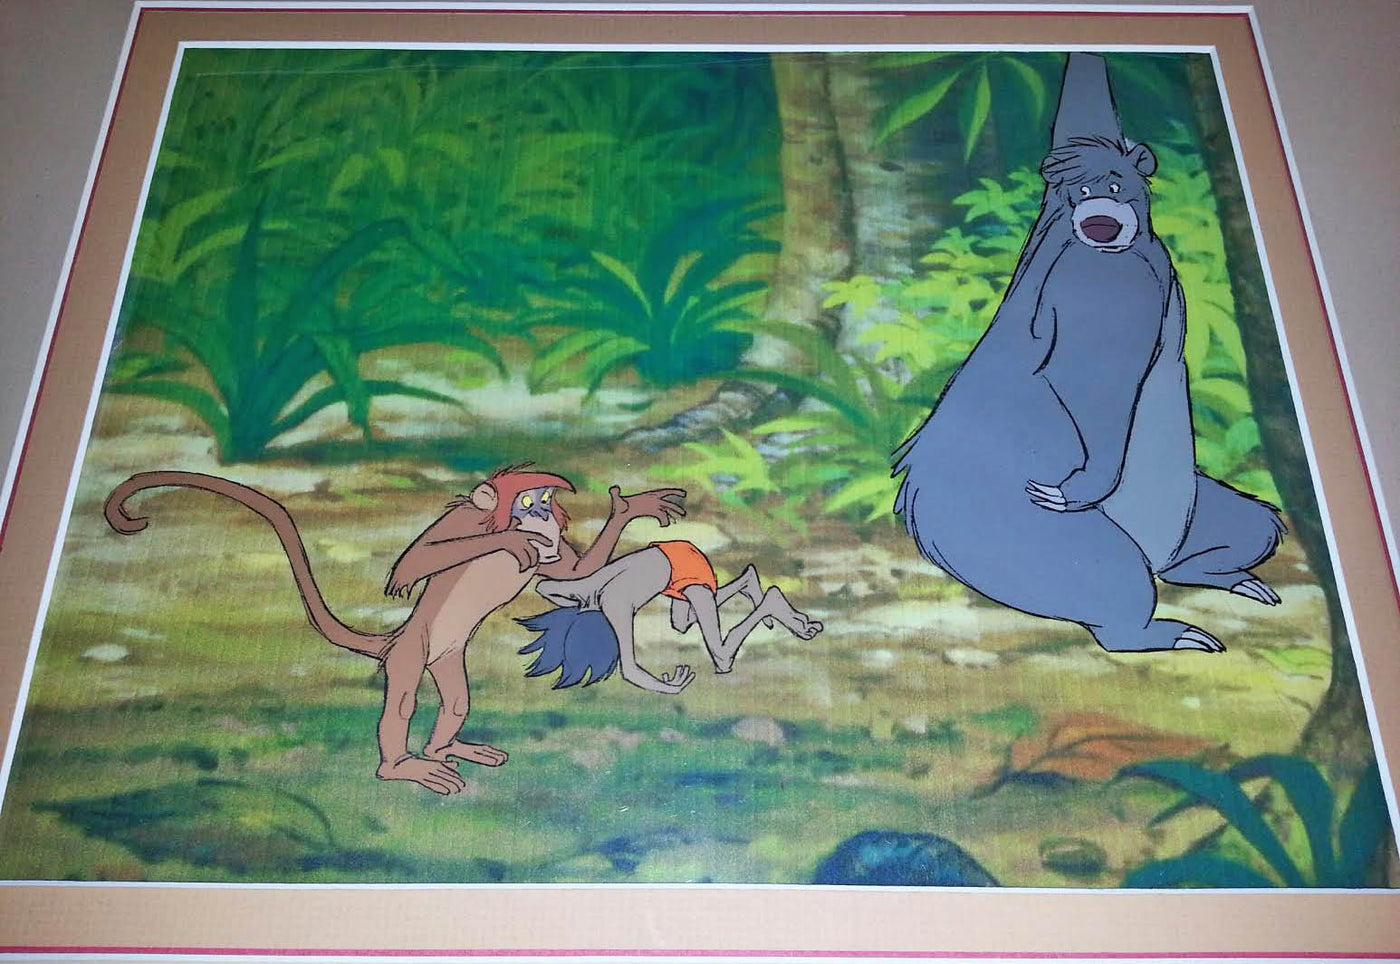 Original Walt Disney Production Cel from The Jungle Book featuring Baloo, Mowgli and Monkey